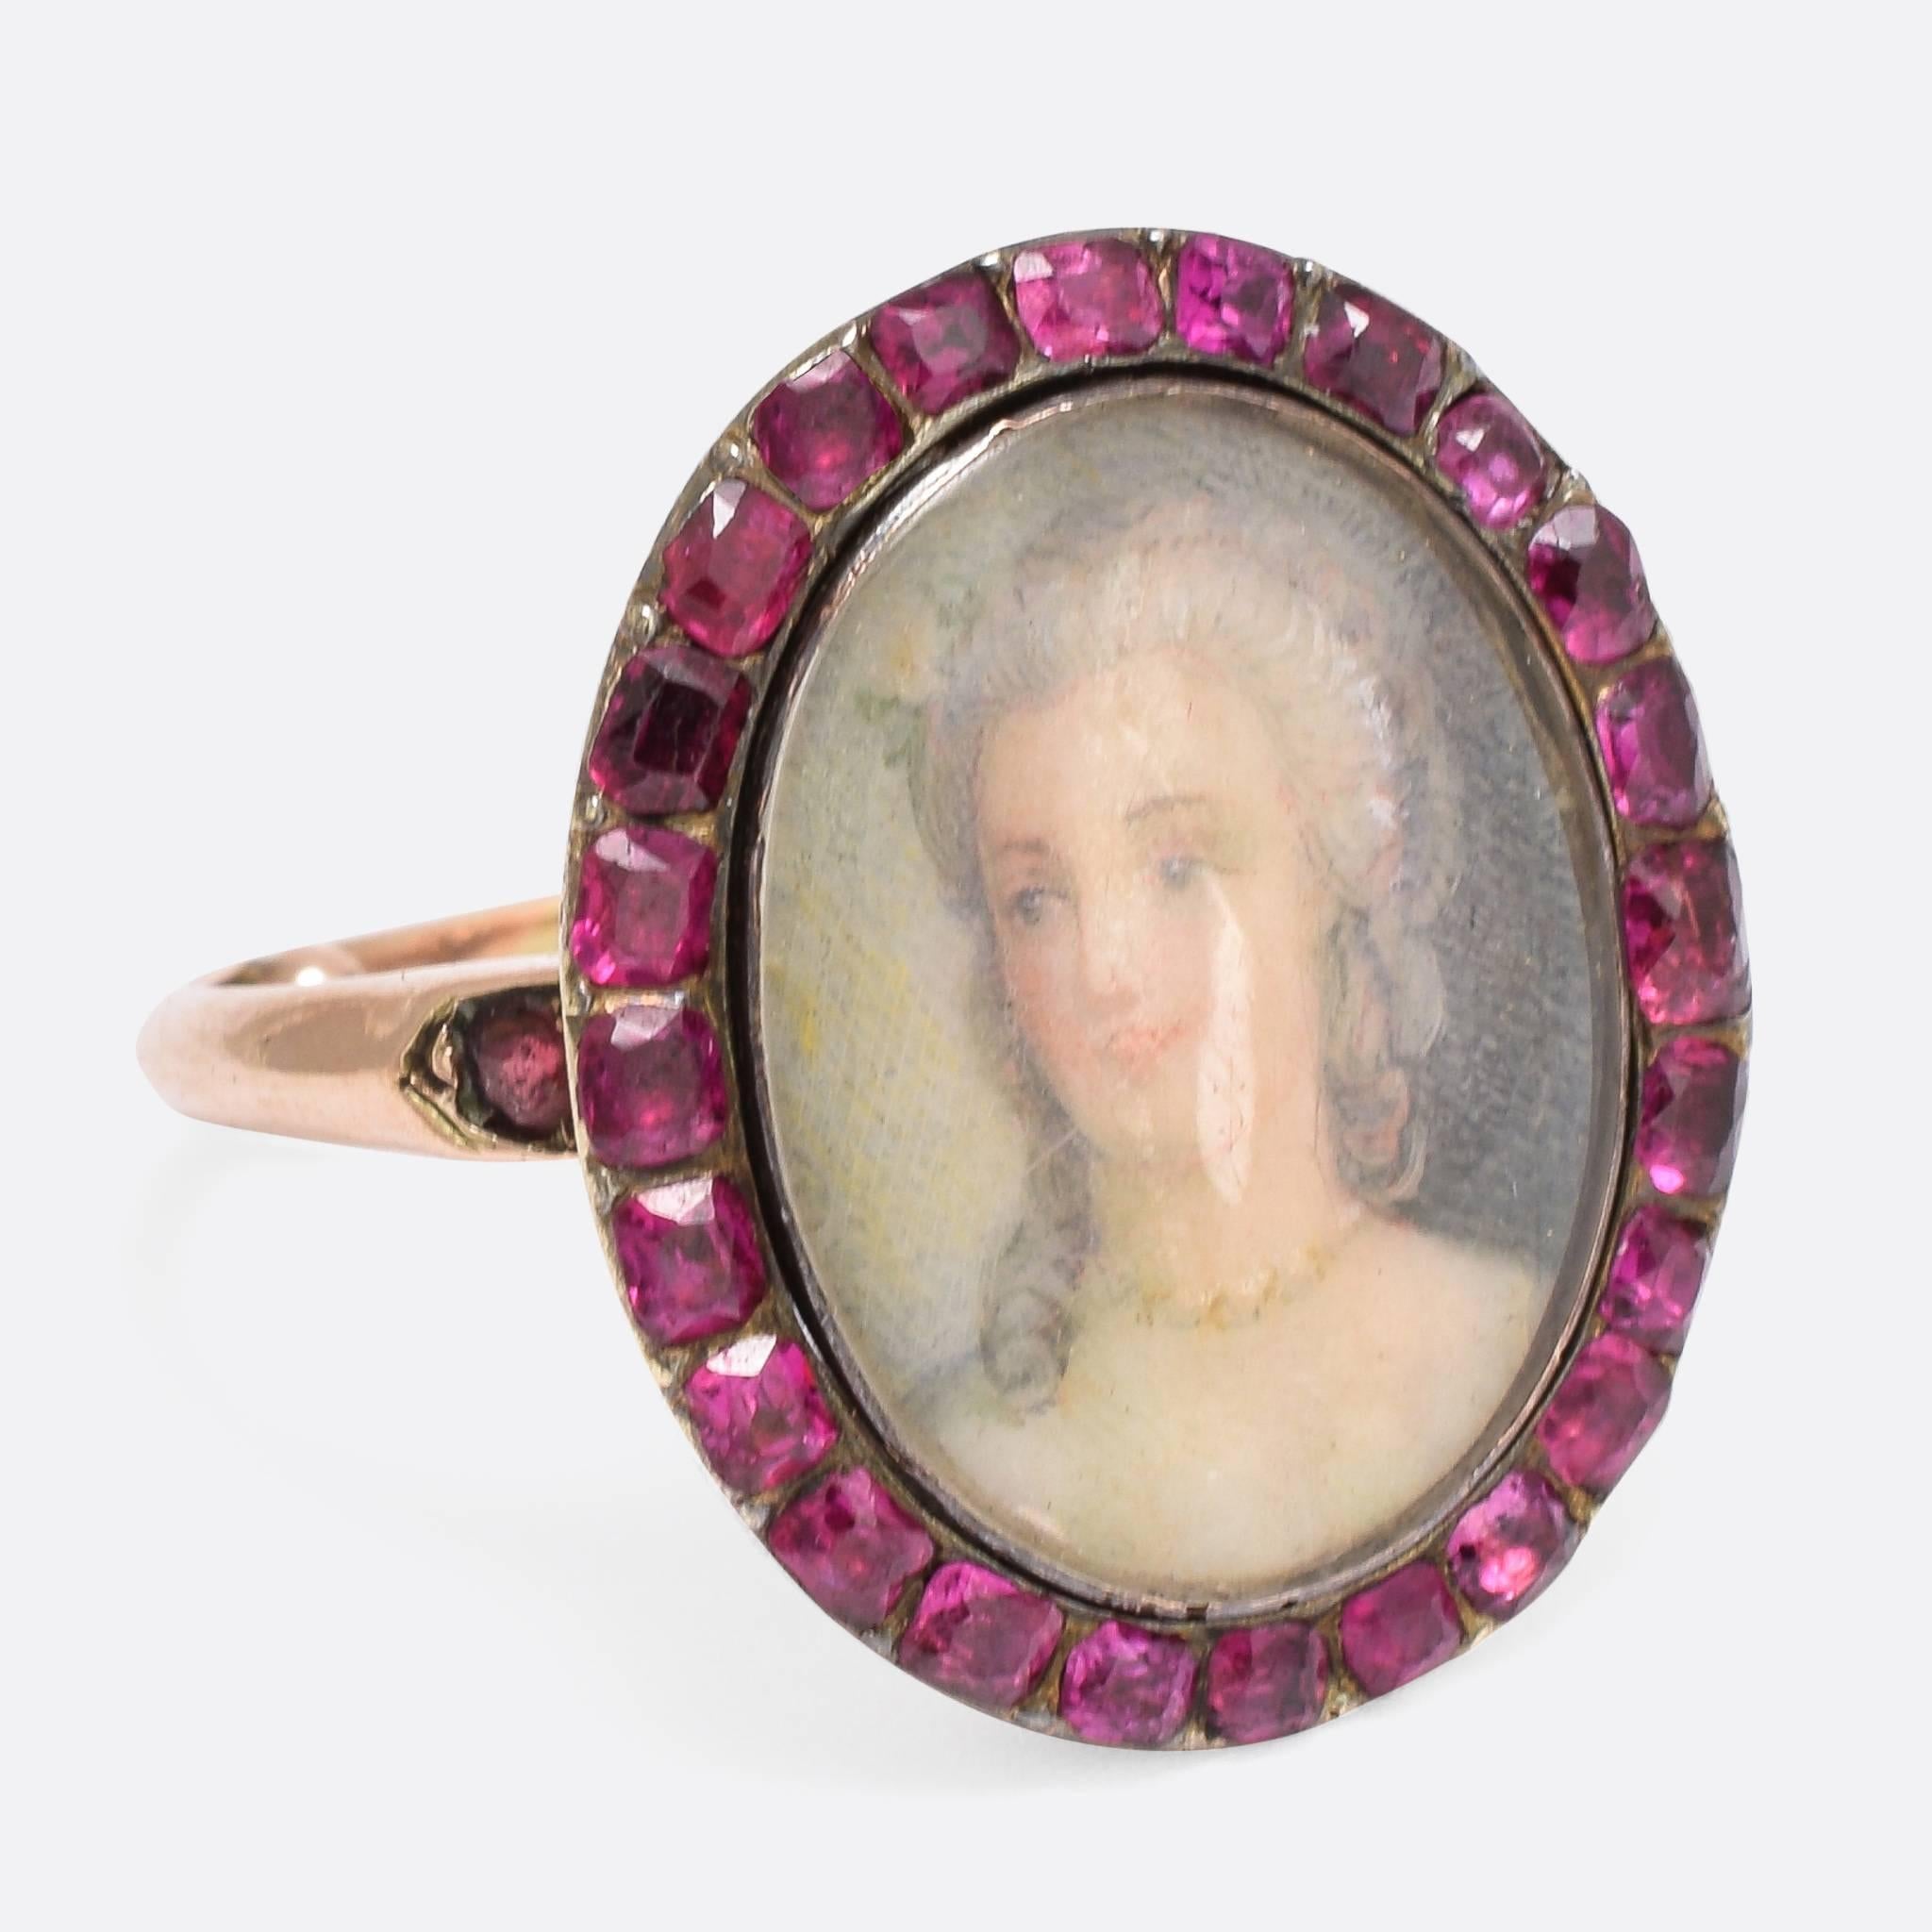 This stunning antique ring features a halo of rubies, around a finely painted miniature portrait of a lady (wearing a rivière necklace, no less!). Modelled in 15k gold, the shoulders feature further ruby accents and the band has had sizing beads